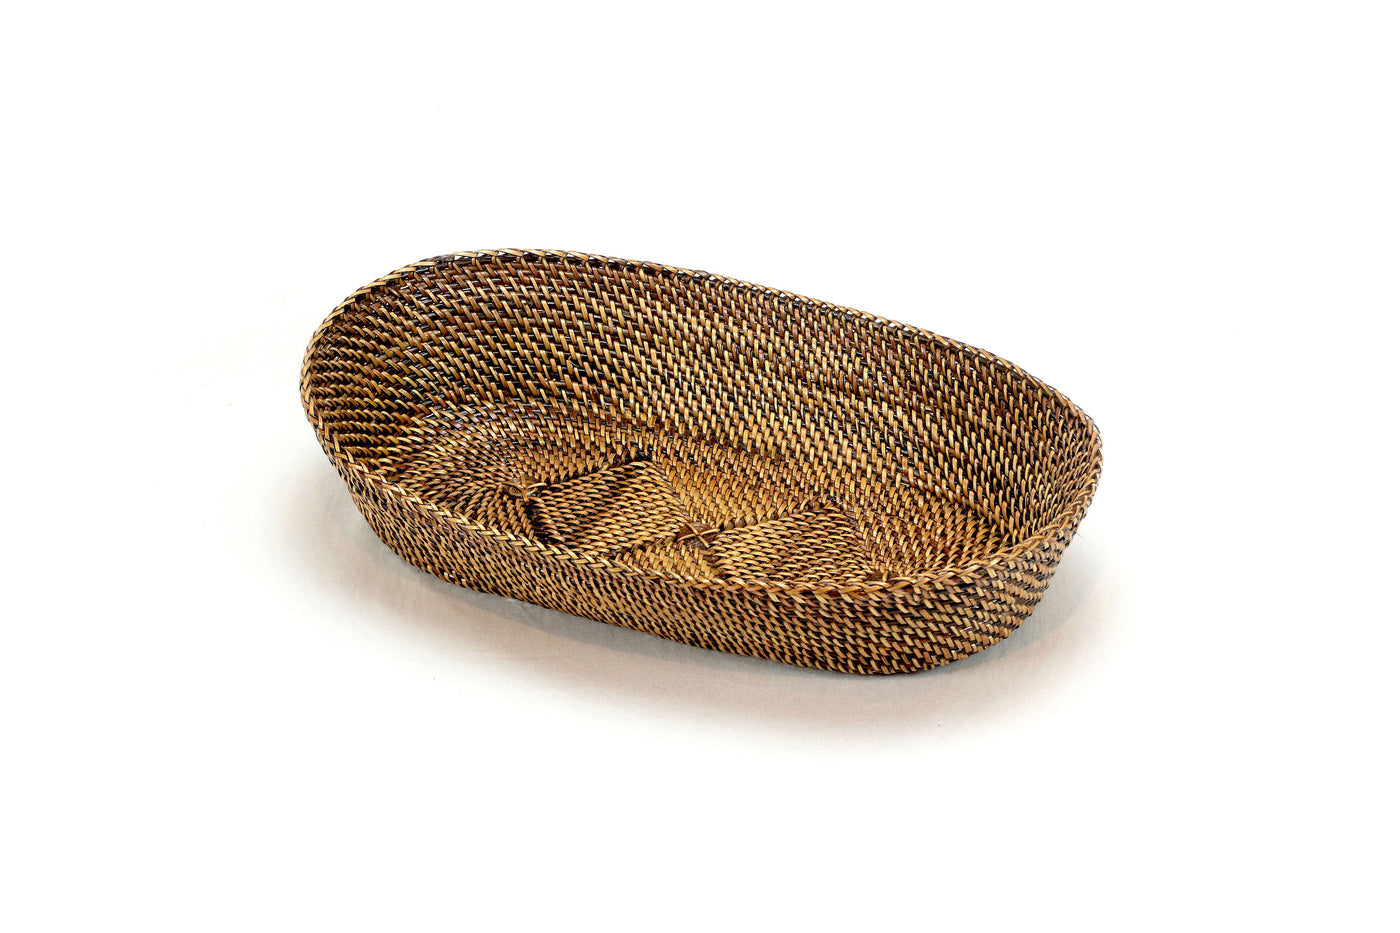 Oval Bread Basket with Braided Edge - Small